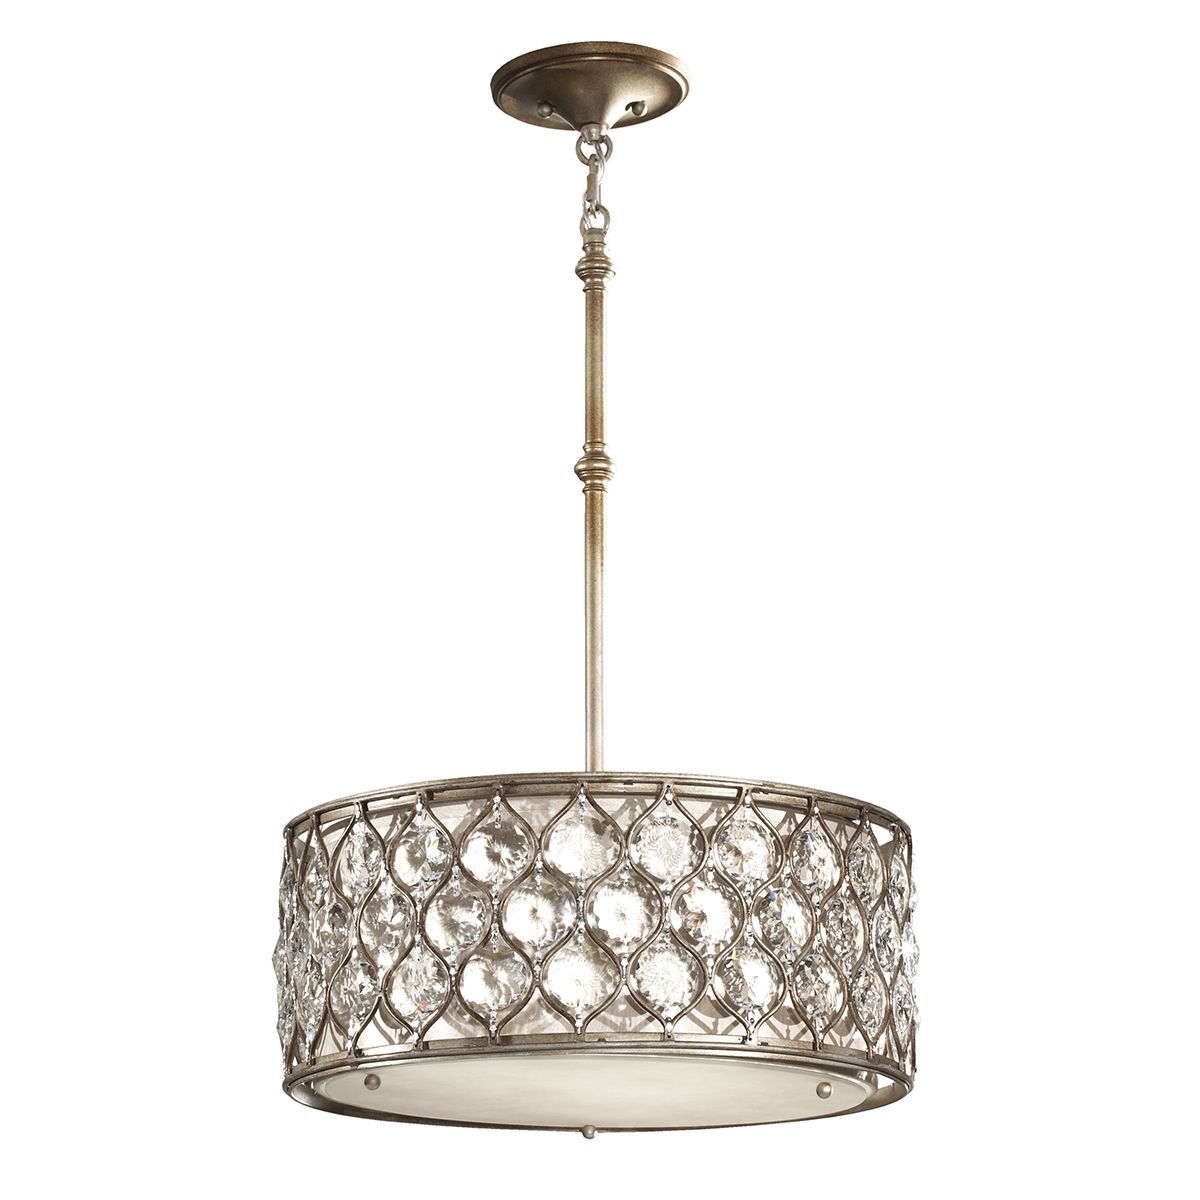 Burnished Silver 25 Inch Four Light Chandeliers Within Newest Lucia 2 Light Pendant Chandelier In Burnished Silver With (View 5 of 20)